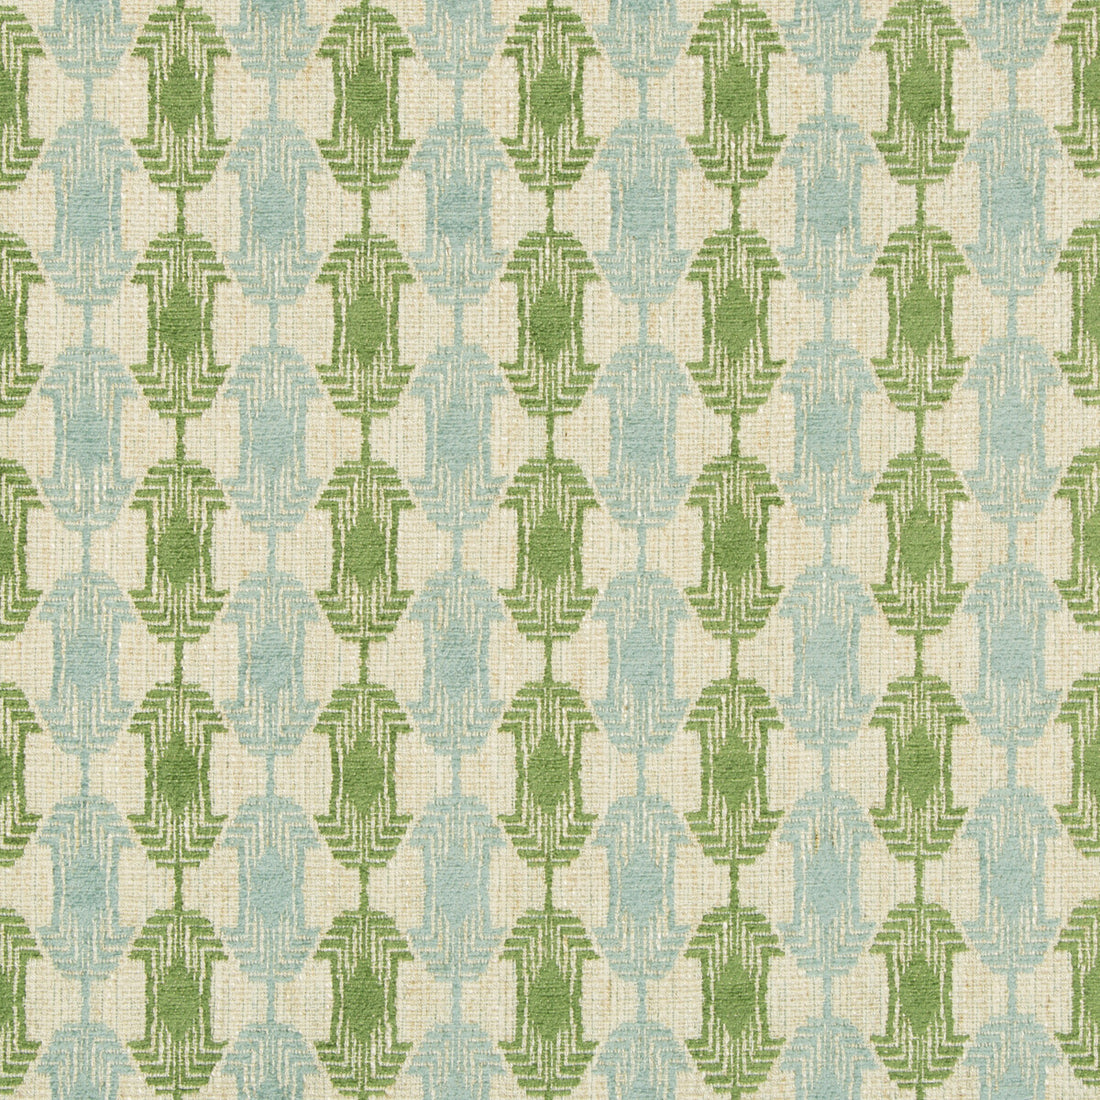 Quartz Weave fabric in aqua green color - pattern GWF-3751.133.0 - by Lee Jofa Modern in the Gems collection